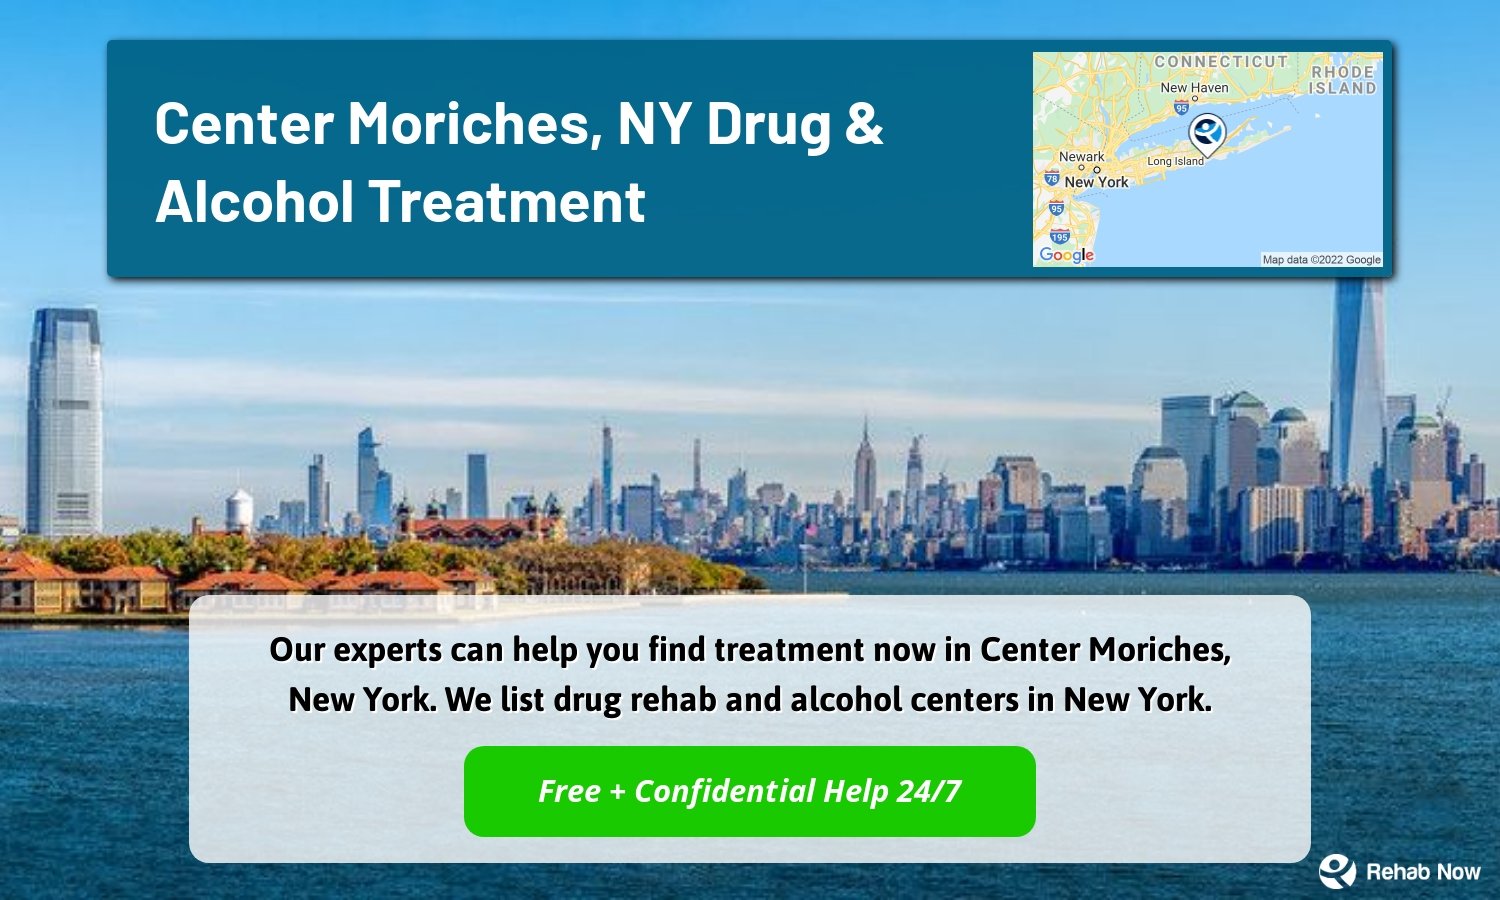 Our experts can help you find treatment now in Center Moriches, New York. We list drug rehab and alcohol centers in New York.